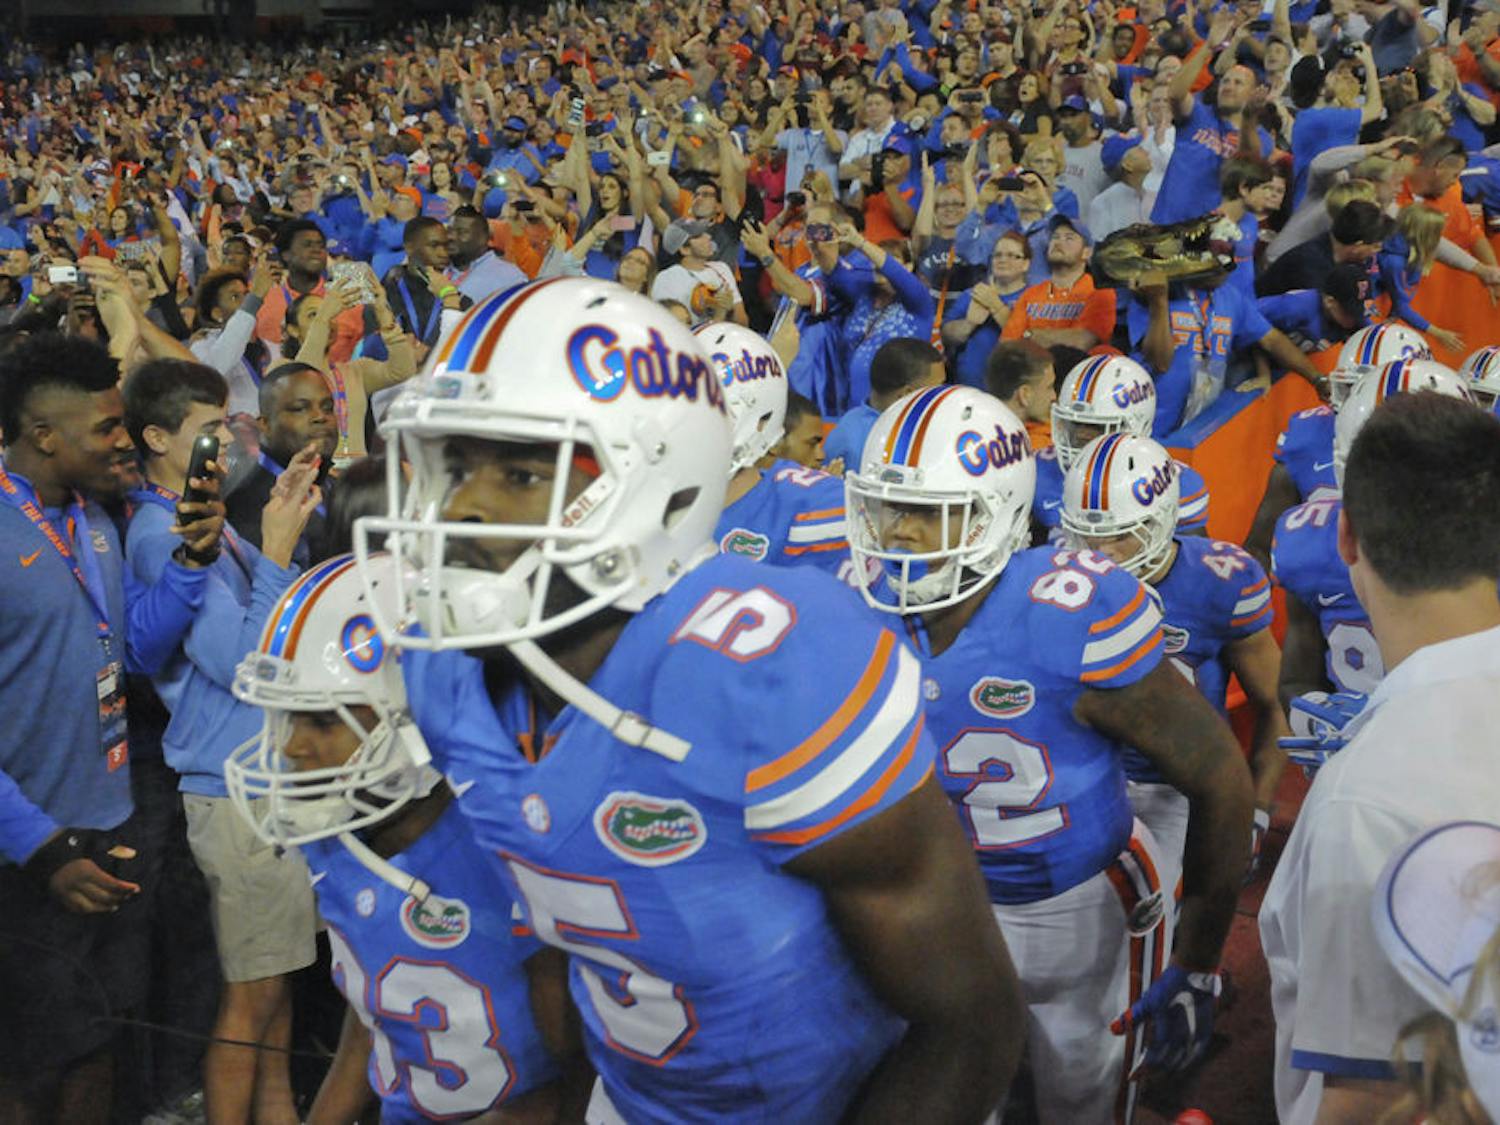 UF football players run out of the tunnel prior to Florida's 27-2 loss to Florida State on Nov. 28, 2015, at Ben Hill Griffin Stadium.